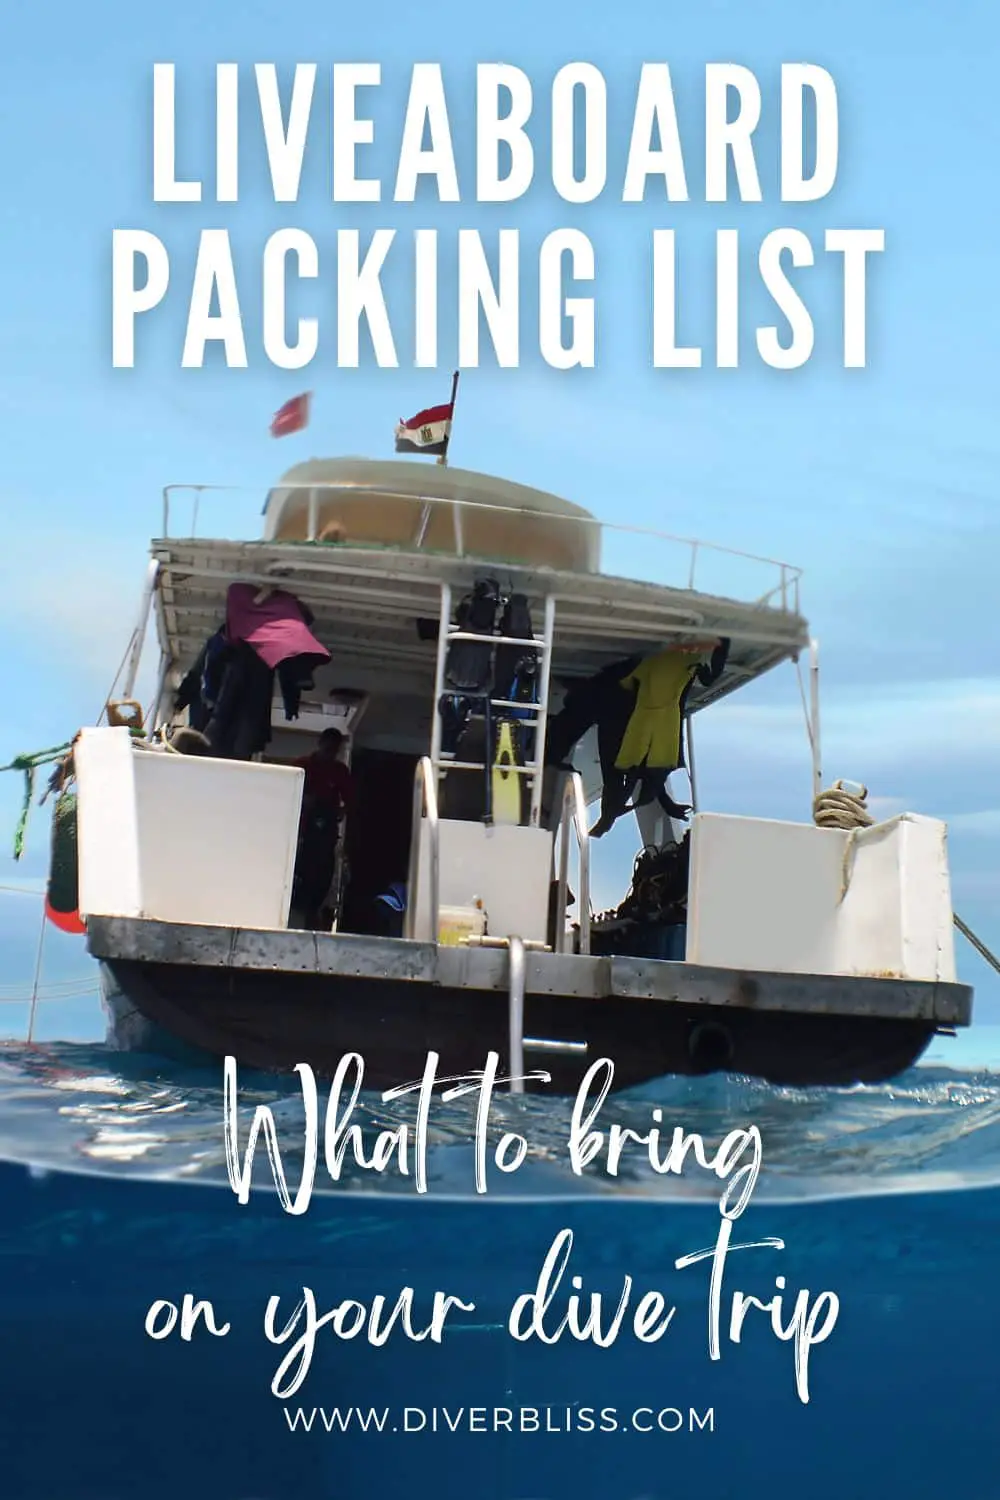 liveaboard packing list: what to bring on your dive trip